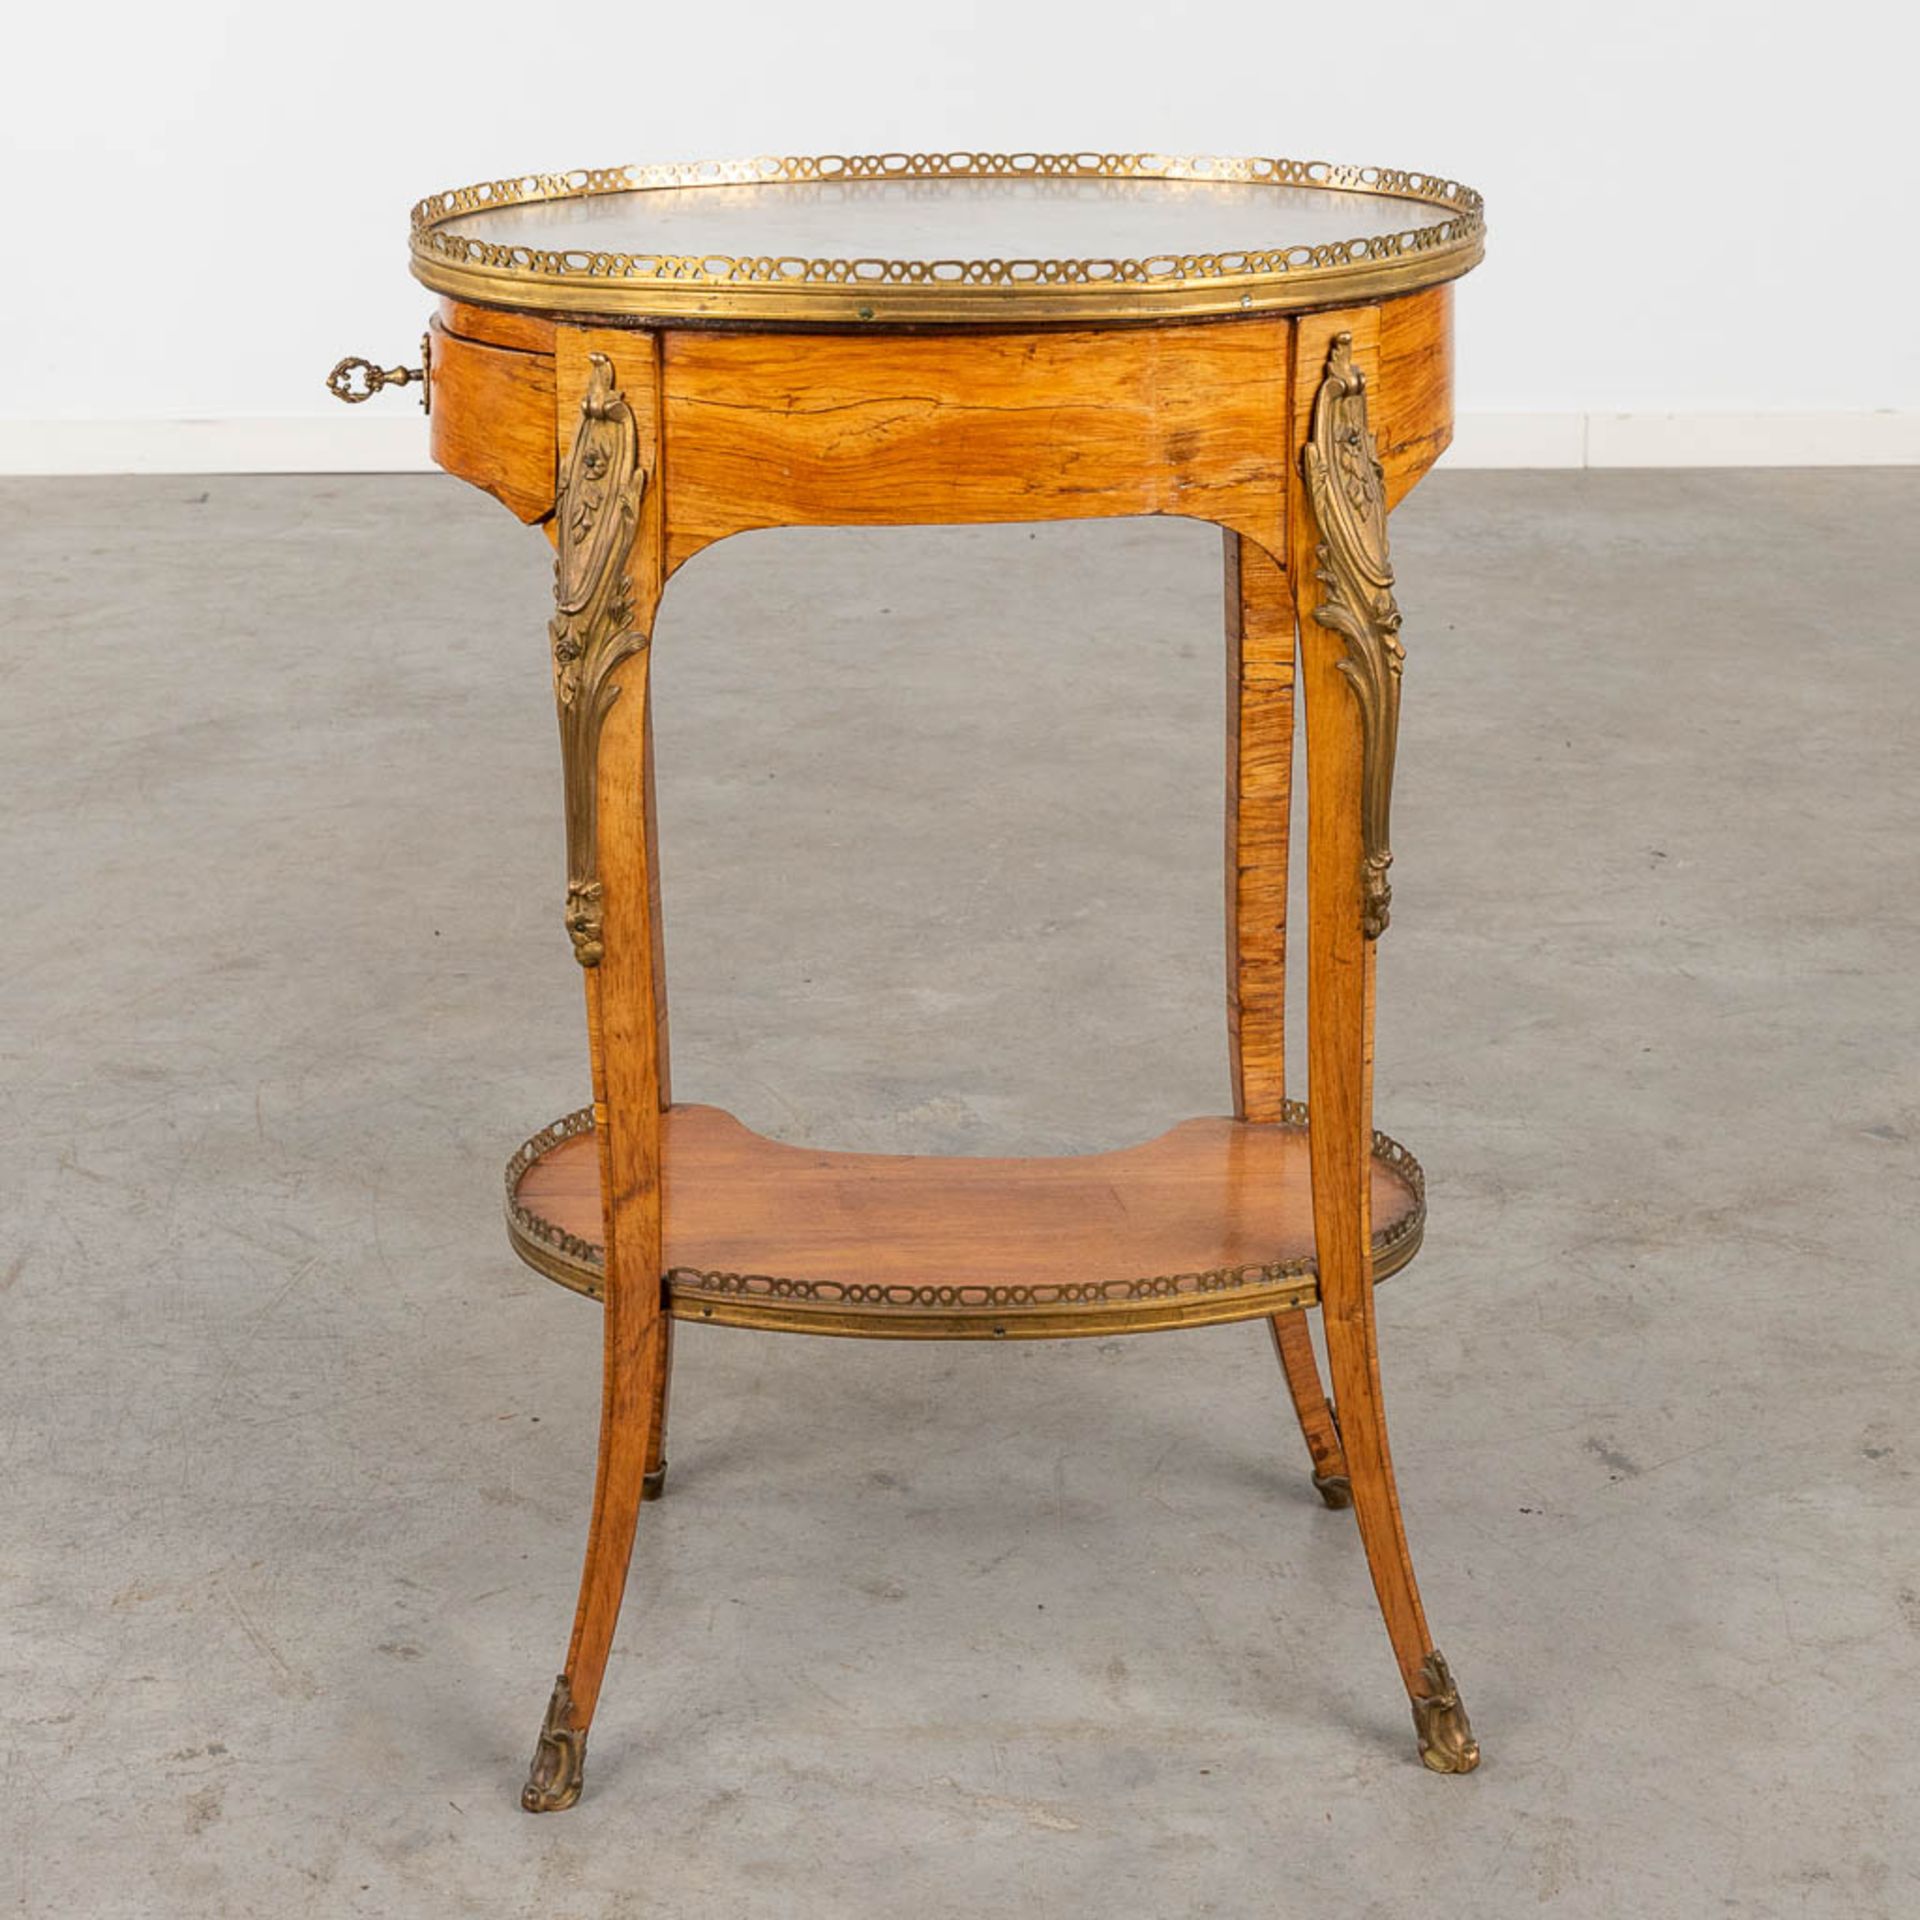 An antique side table, Louis XV, marquetry mounted with bronze and marble, 18th C. (D:38 x W:50 x H: - Image 6 of 14